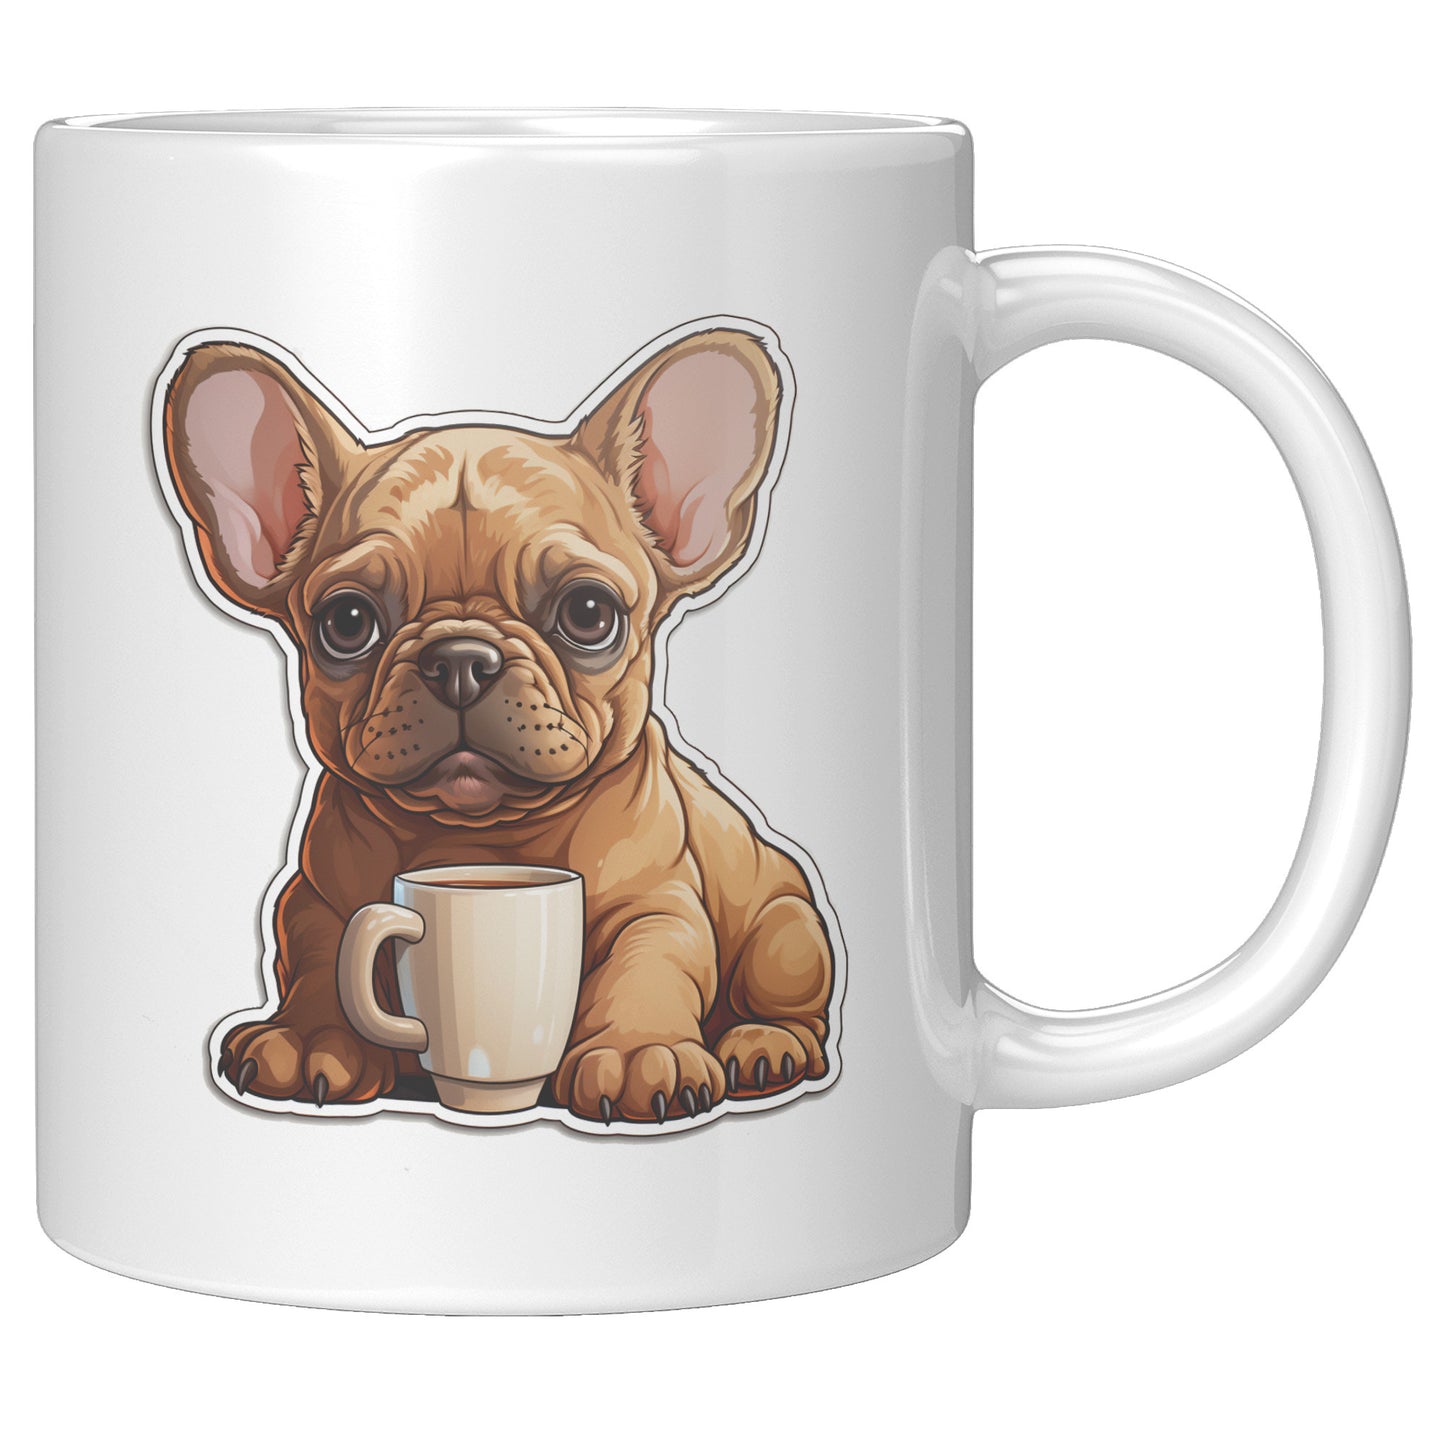 Endearing Frenchie Art Coffee Mug - Ideal Gift for Canine Lovers